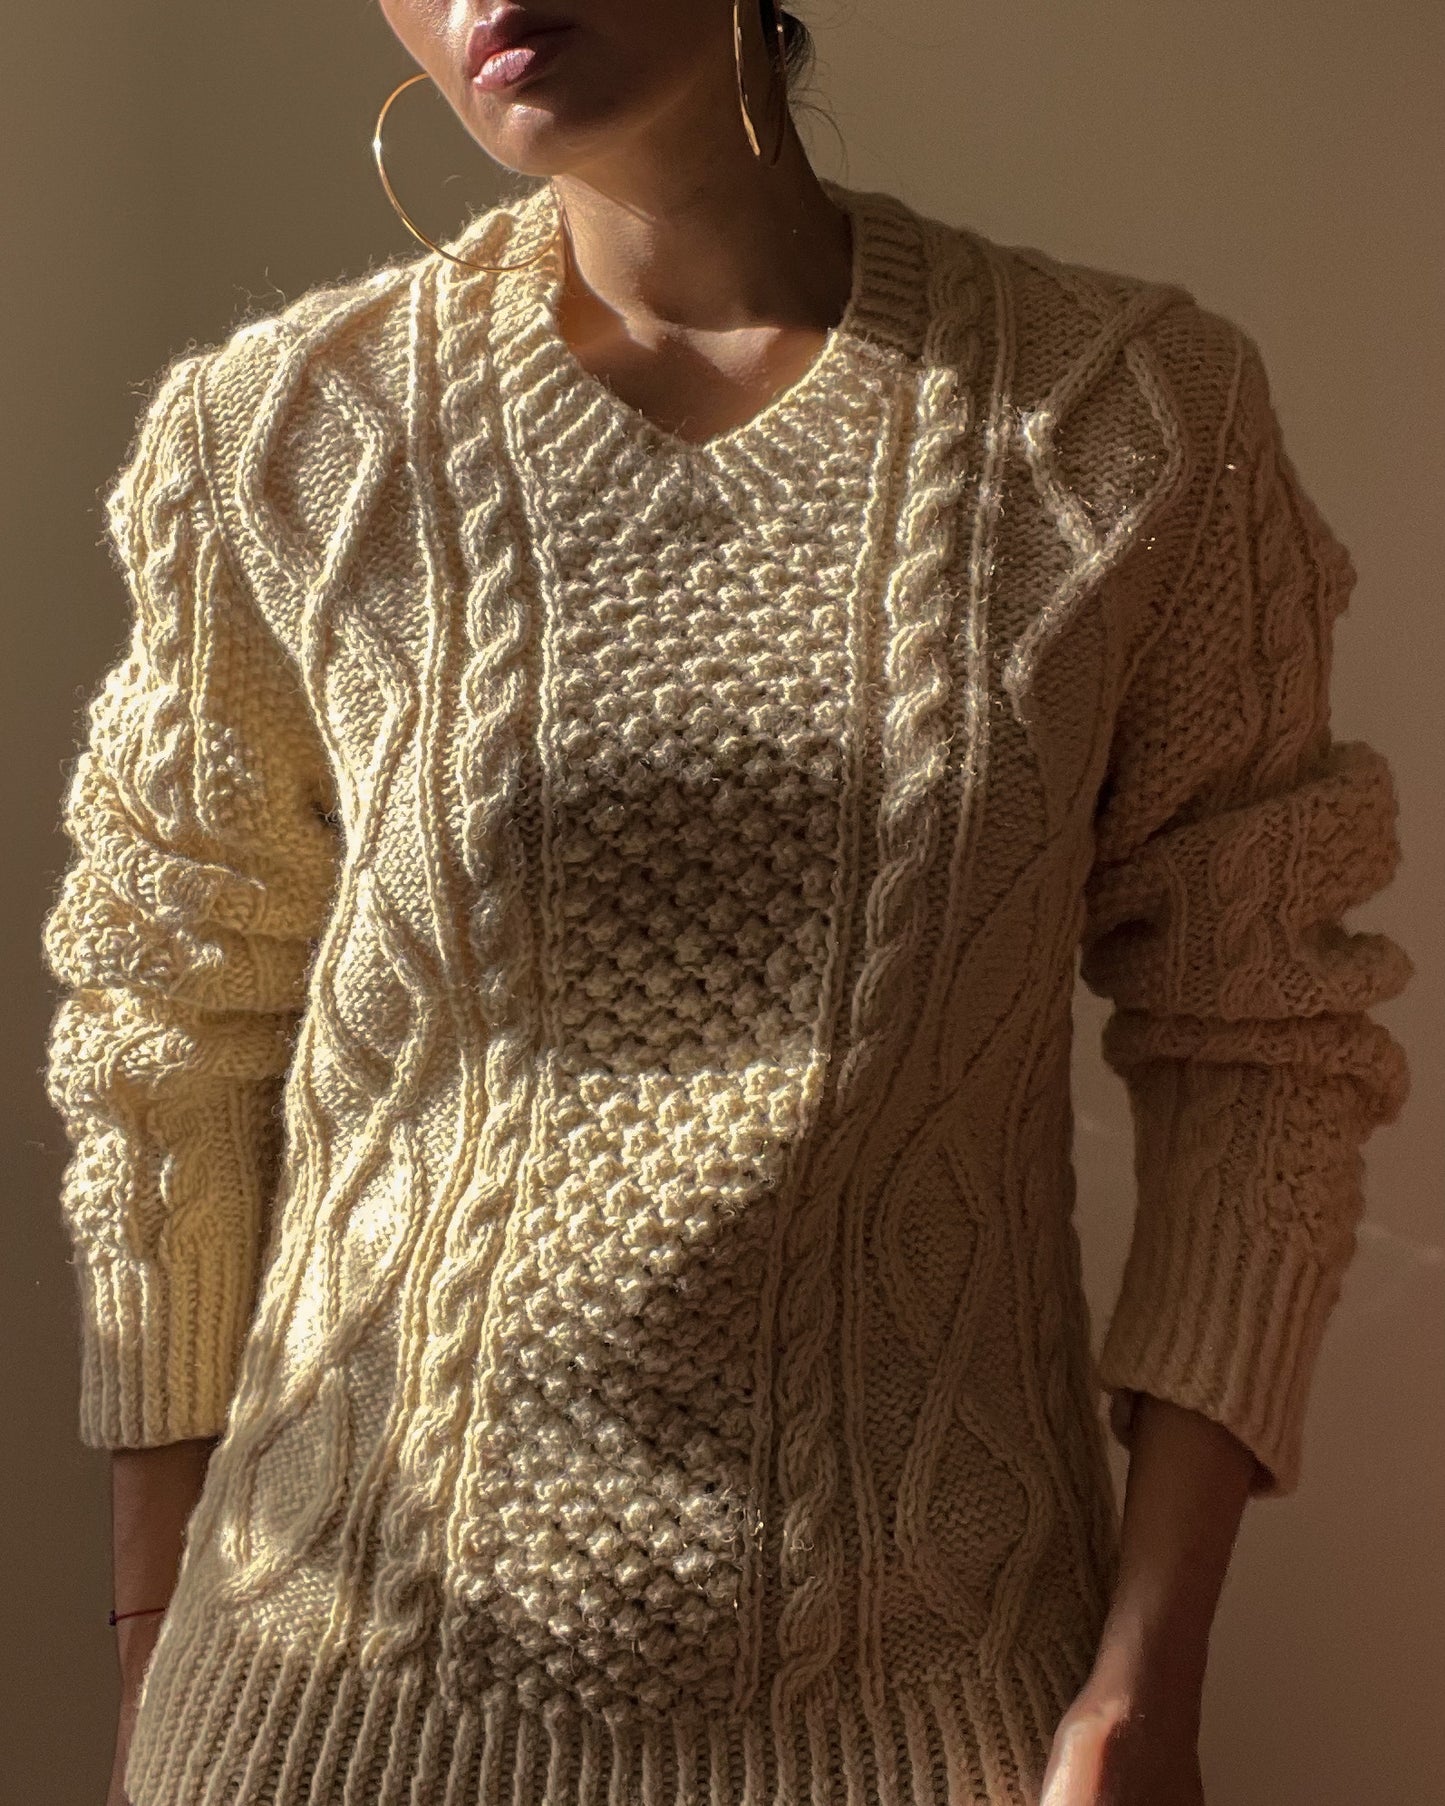 Vintage Chunky Knit Wool Sweater in Cream Color